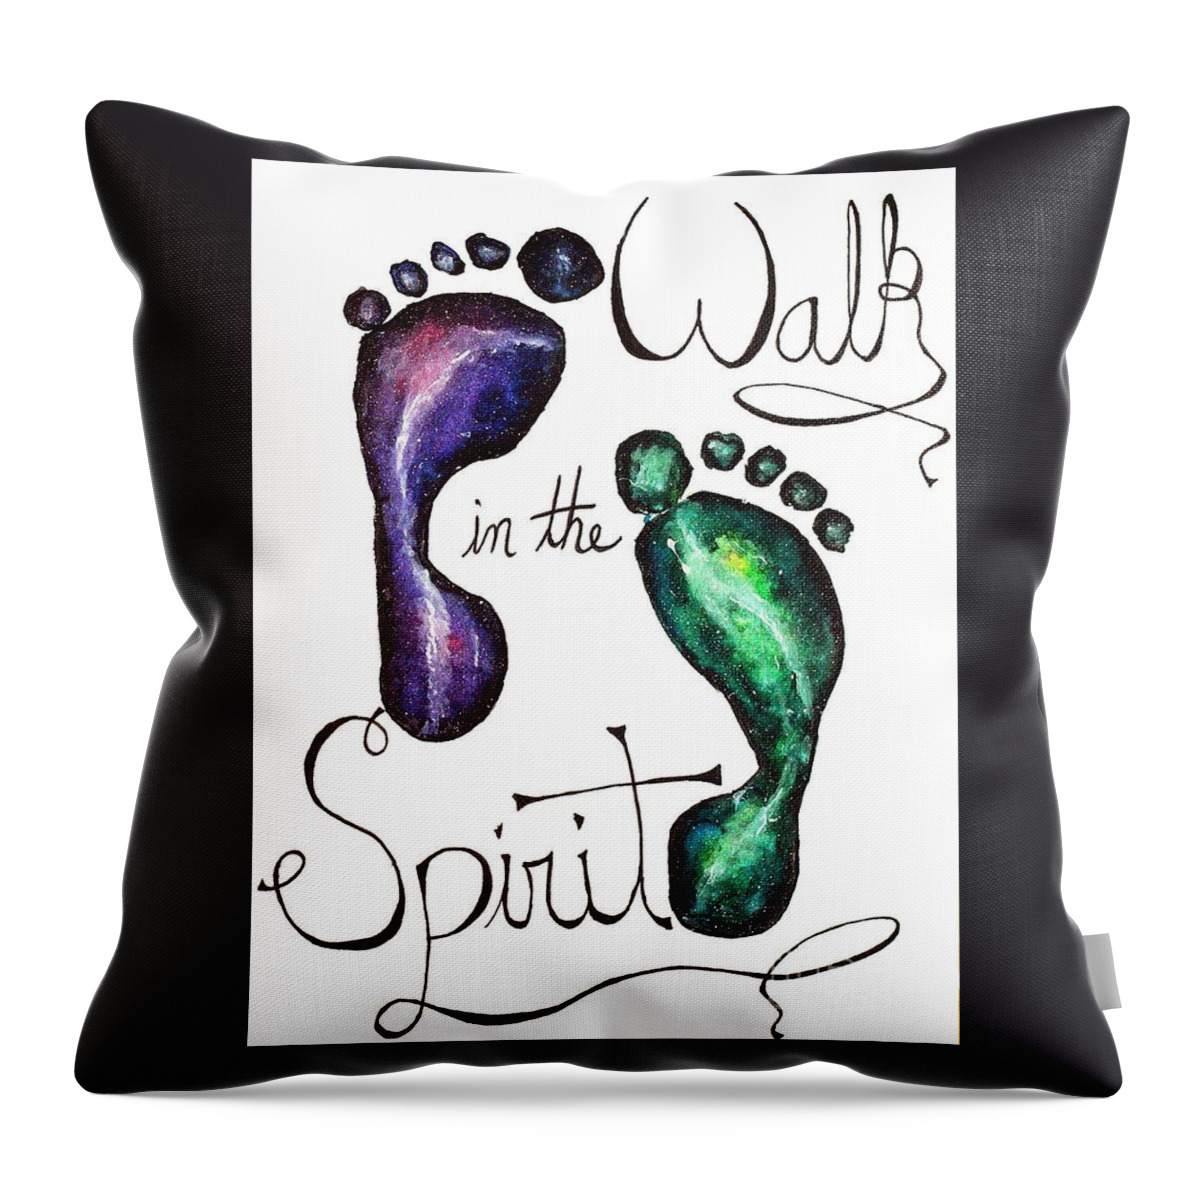 Watercolor Throw Pillow featuring the painting Walk in the Spirit by Tiffany Jones